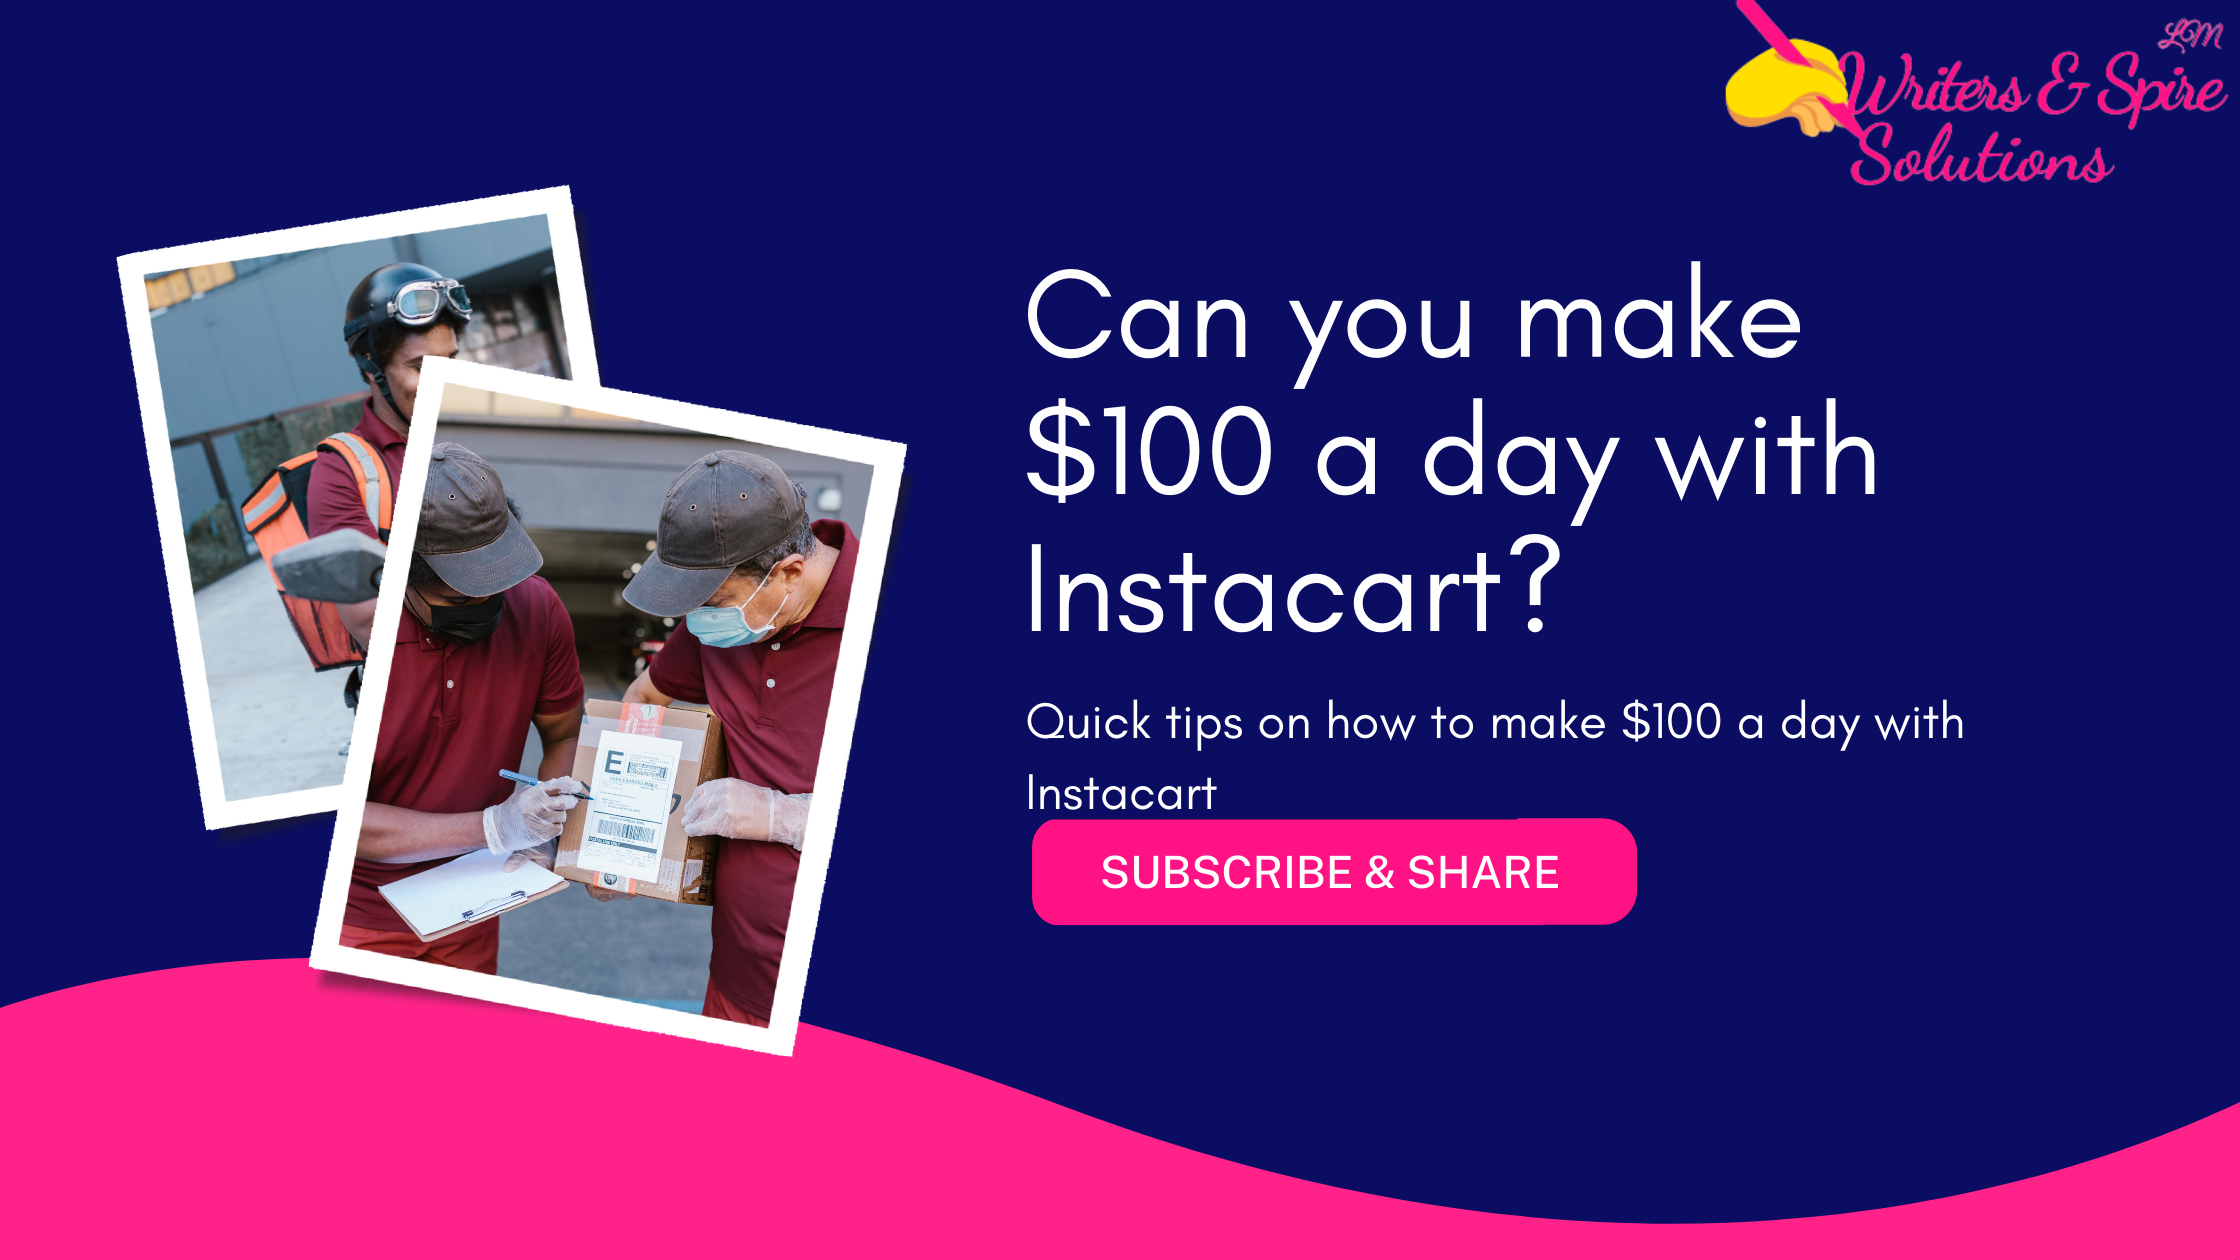 Can you make $100 a day with Instacart?